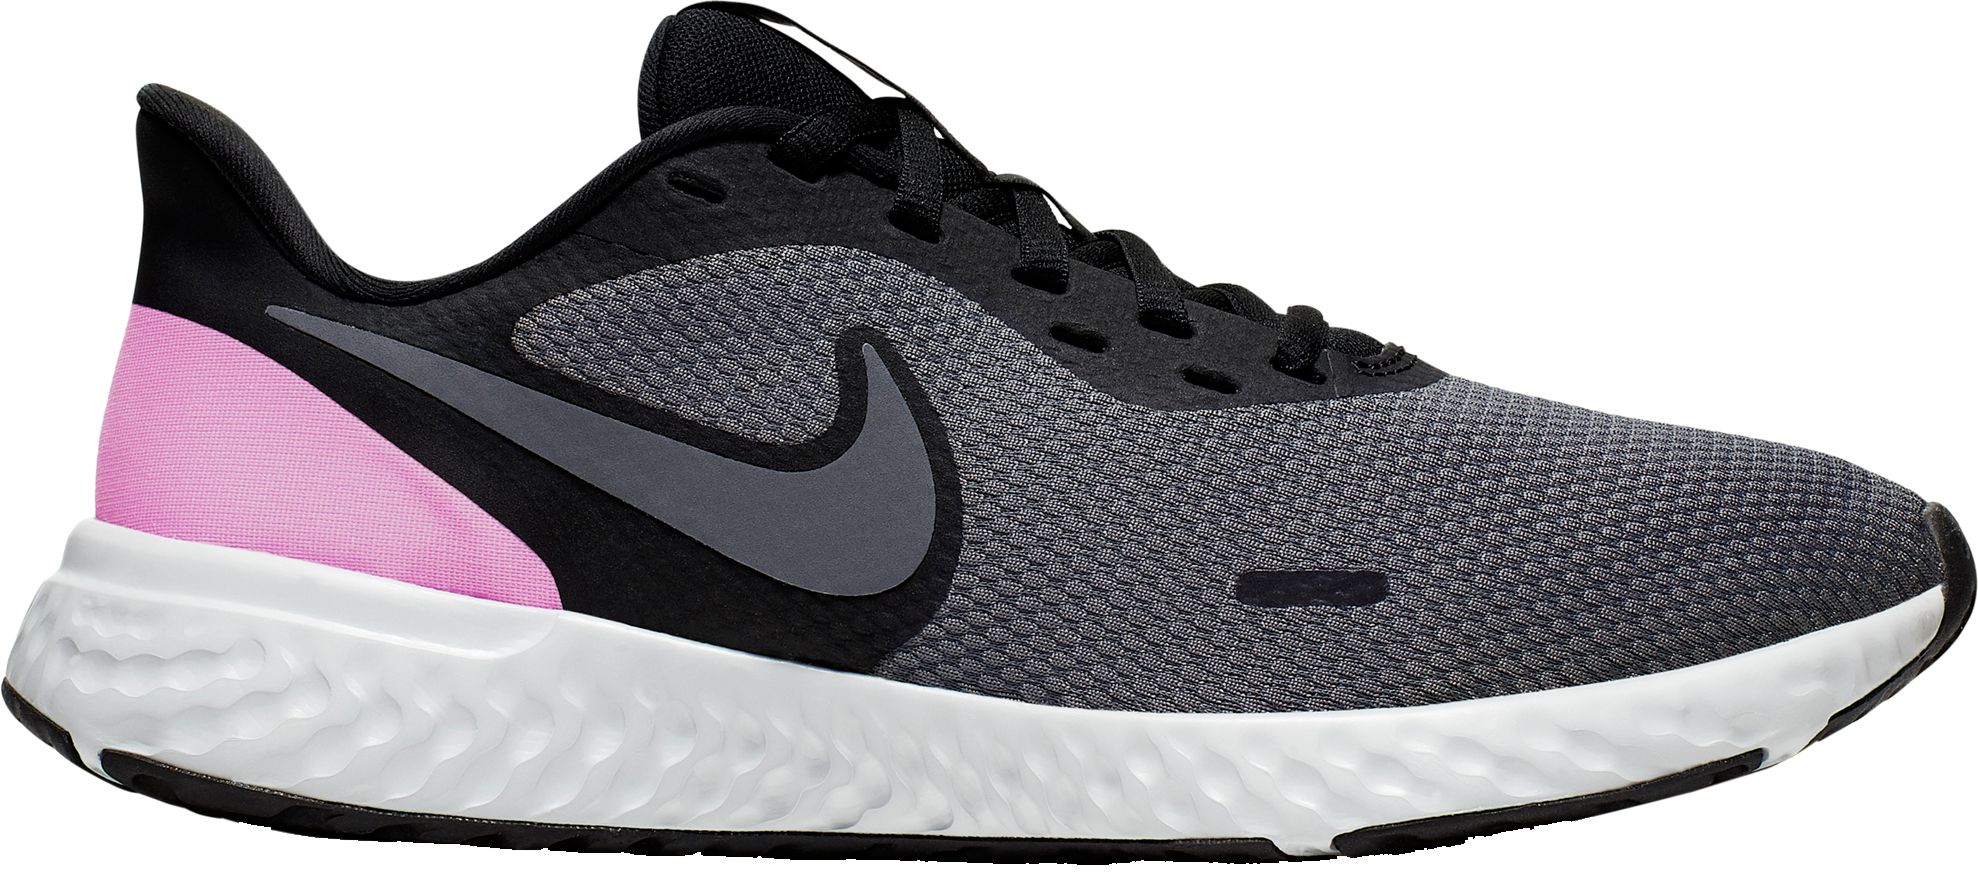 black and pink nike shoes